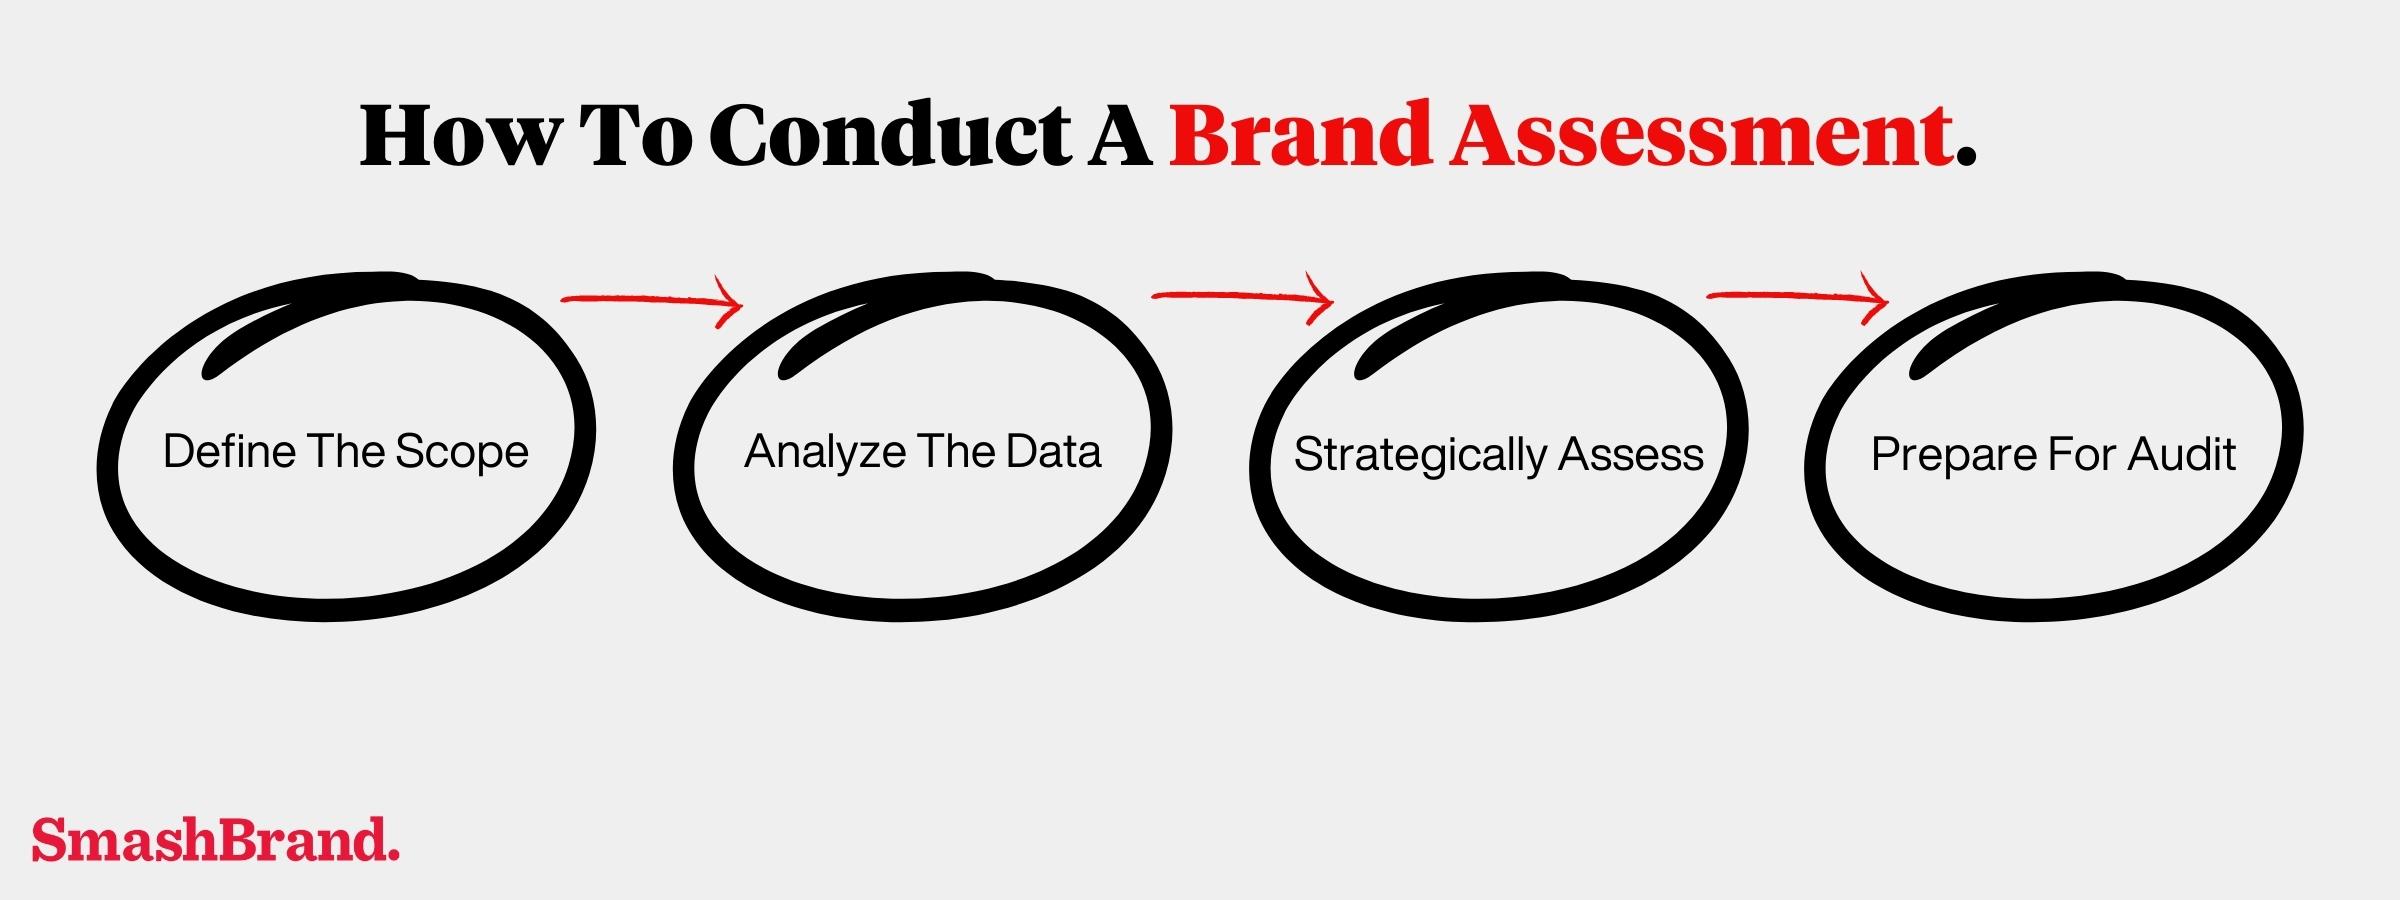 How To Conduct A Brand Assessment